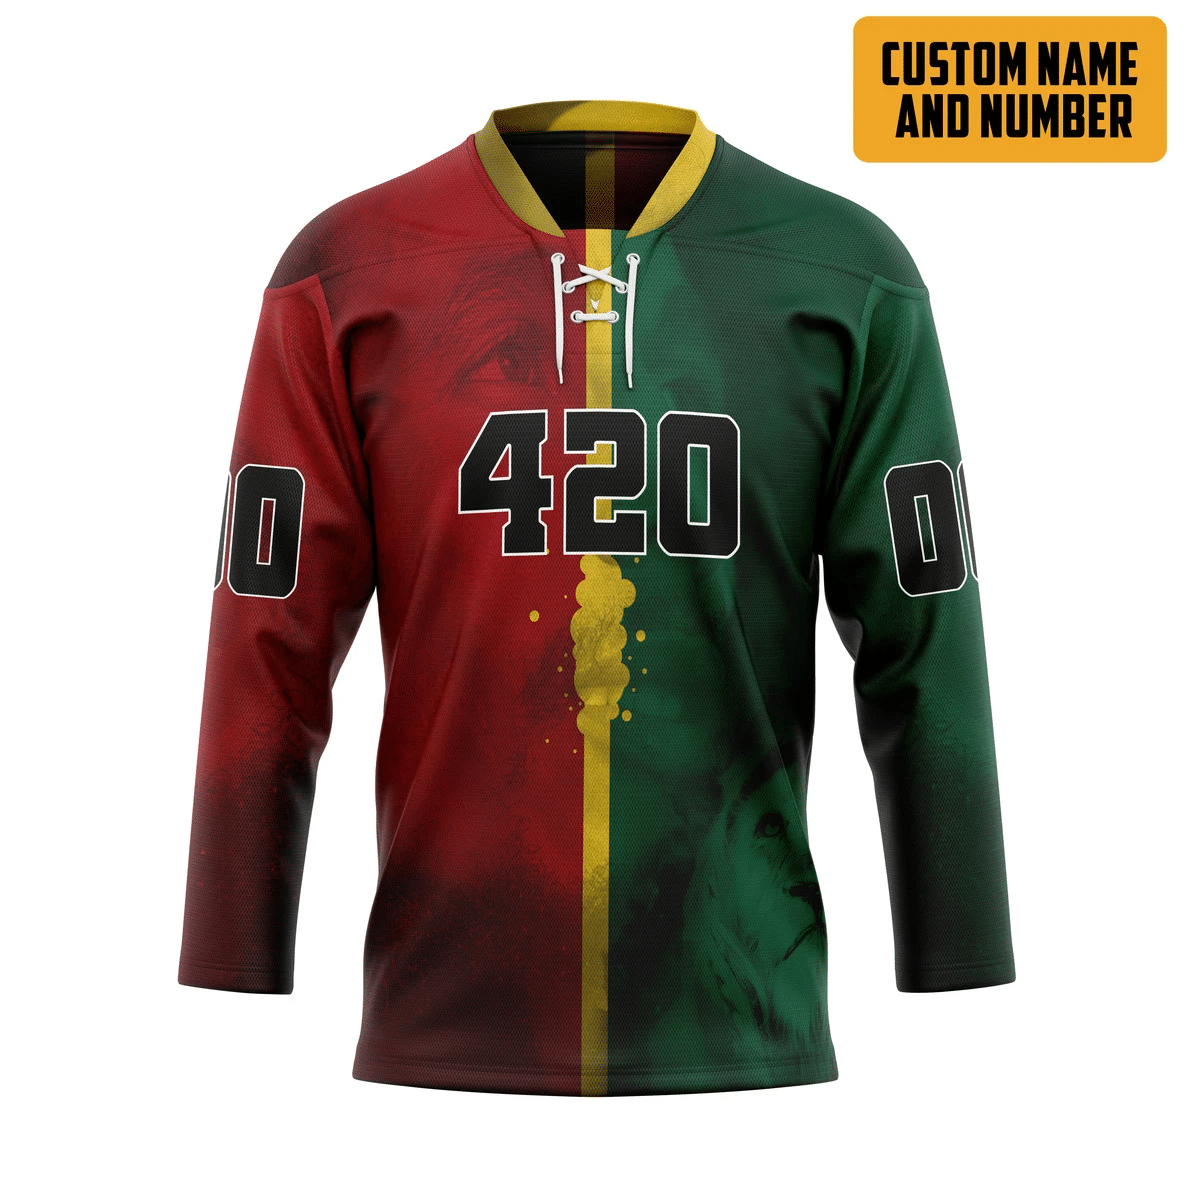 Check out our collection of unique and stylish hockey jerseys from all over the world 55